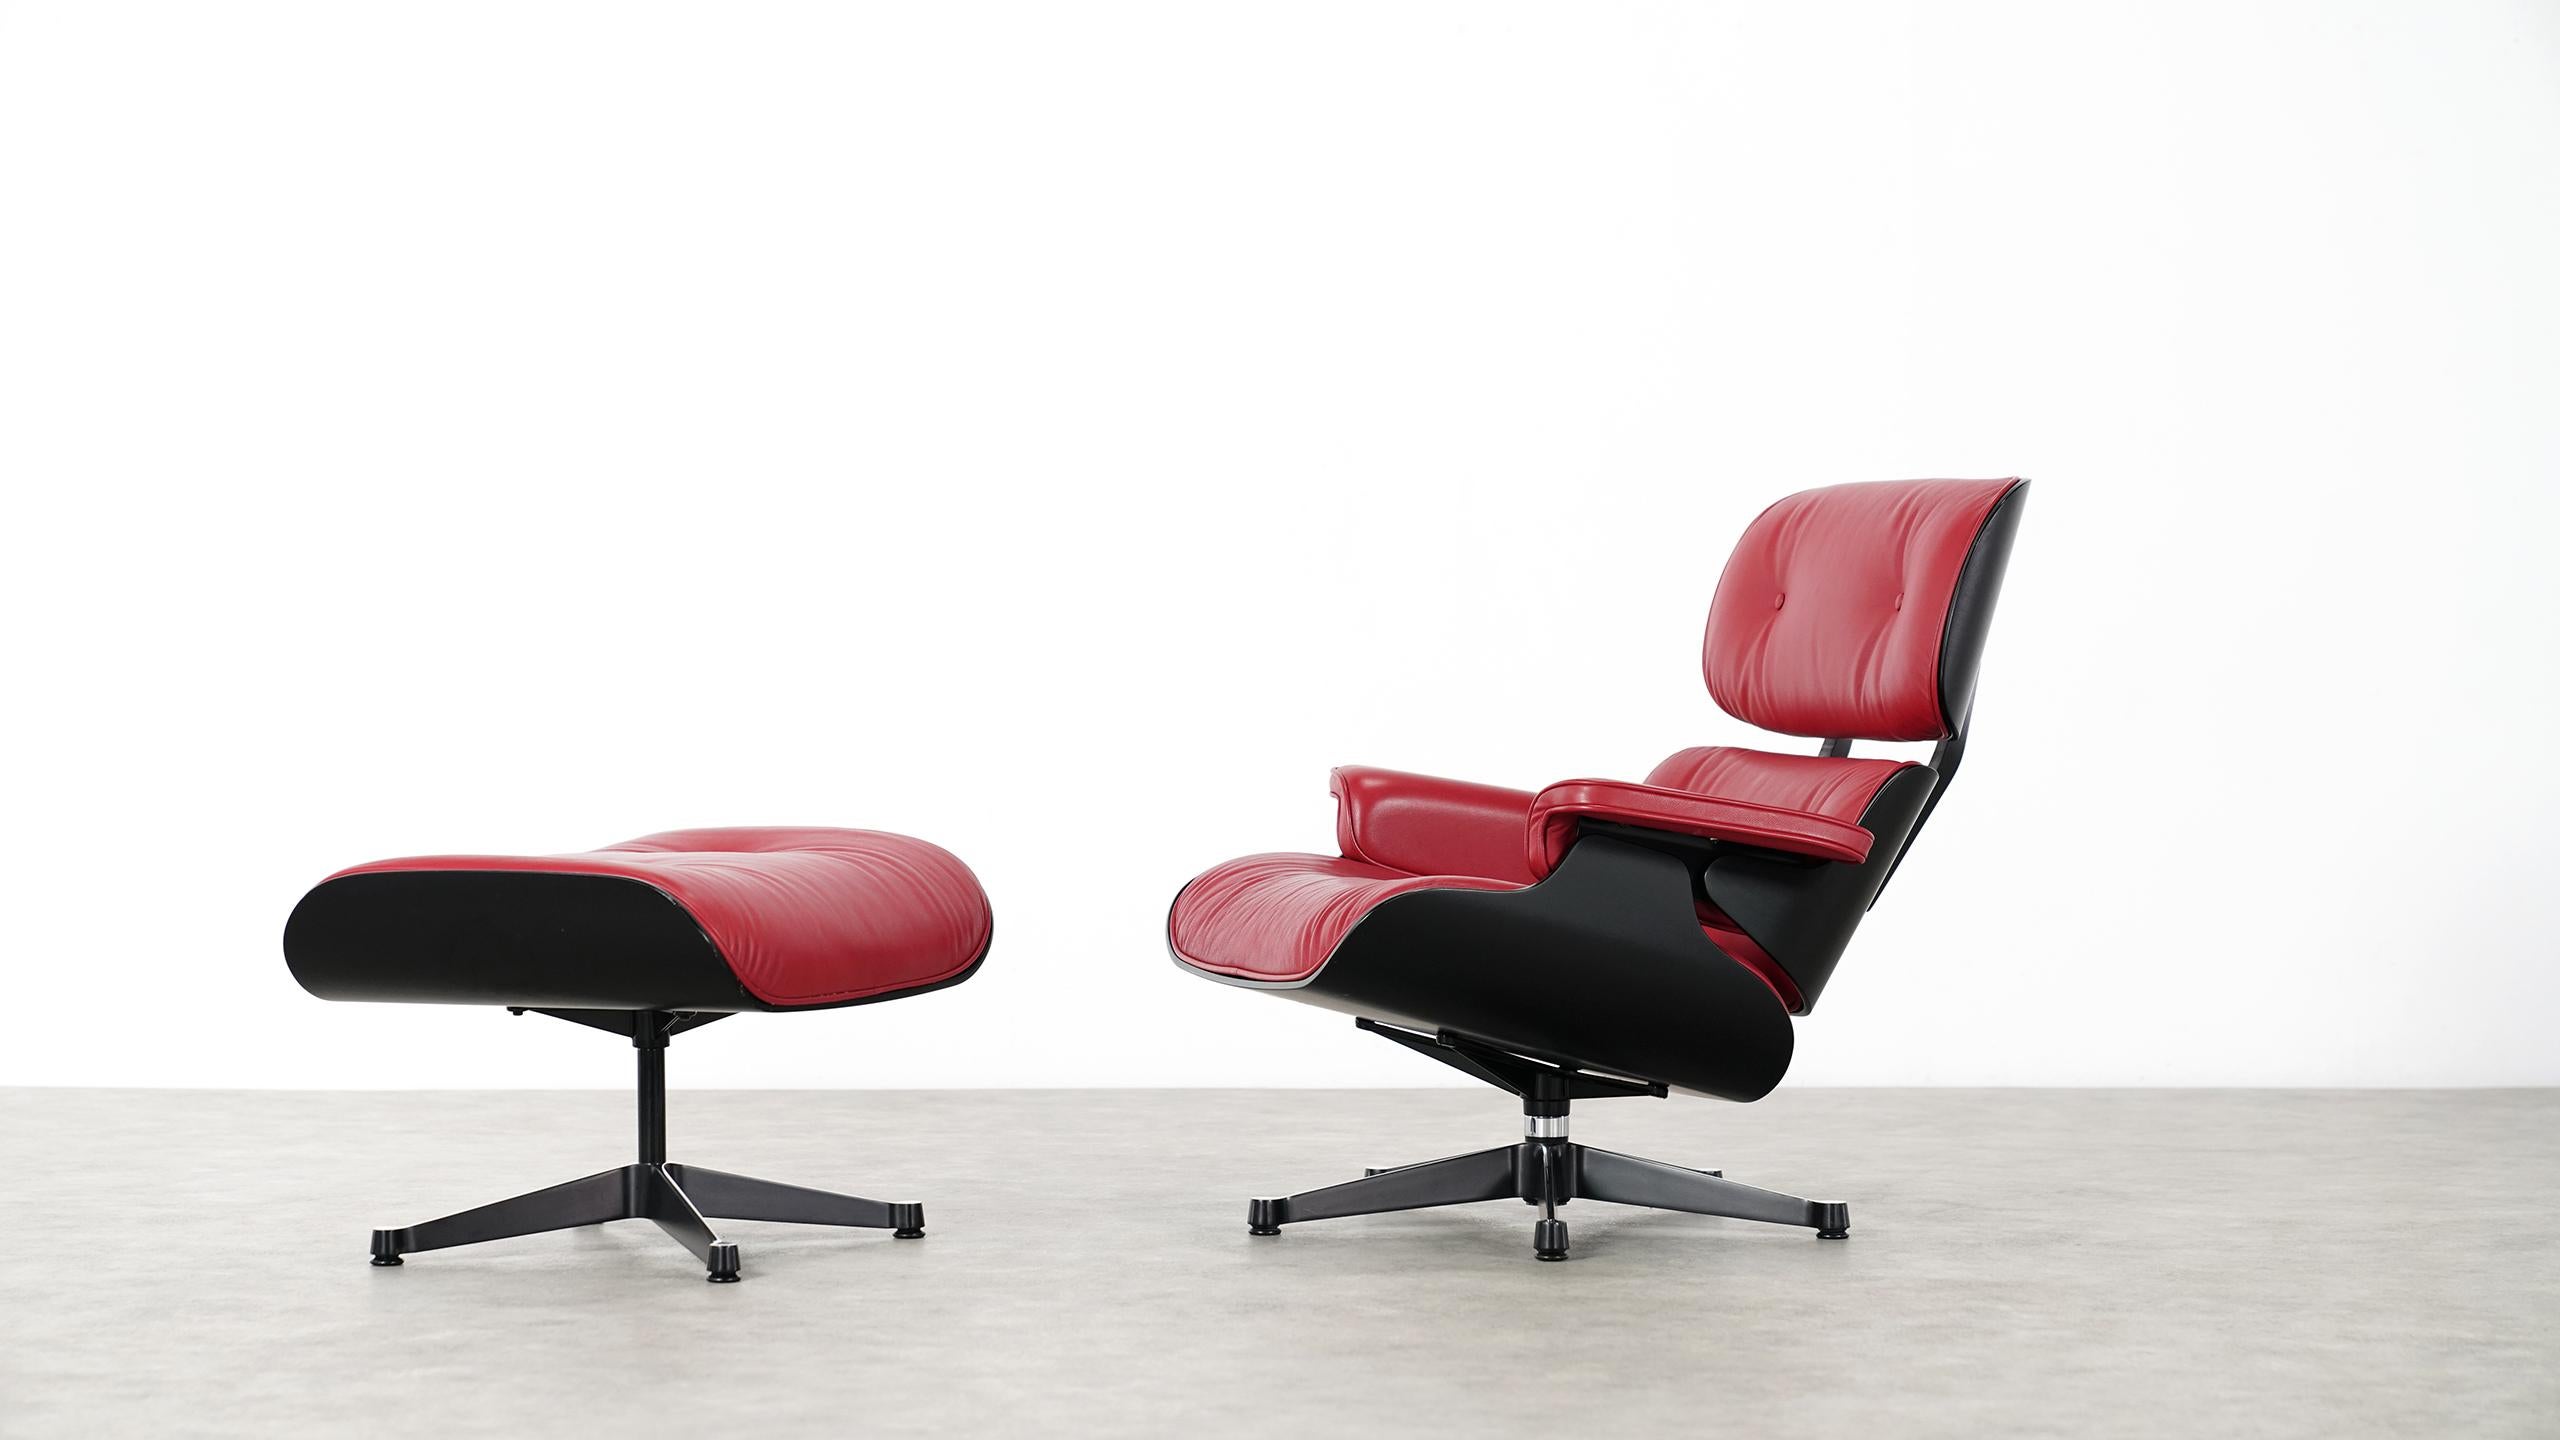 Mid-20th Century Vitra Charles Eames Lounge Chair and Ottoman by Vitra Red Leather, Black Shells